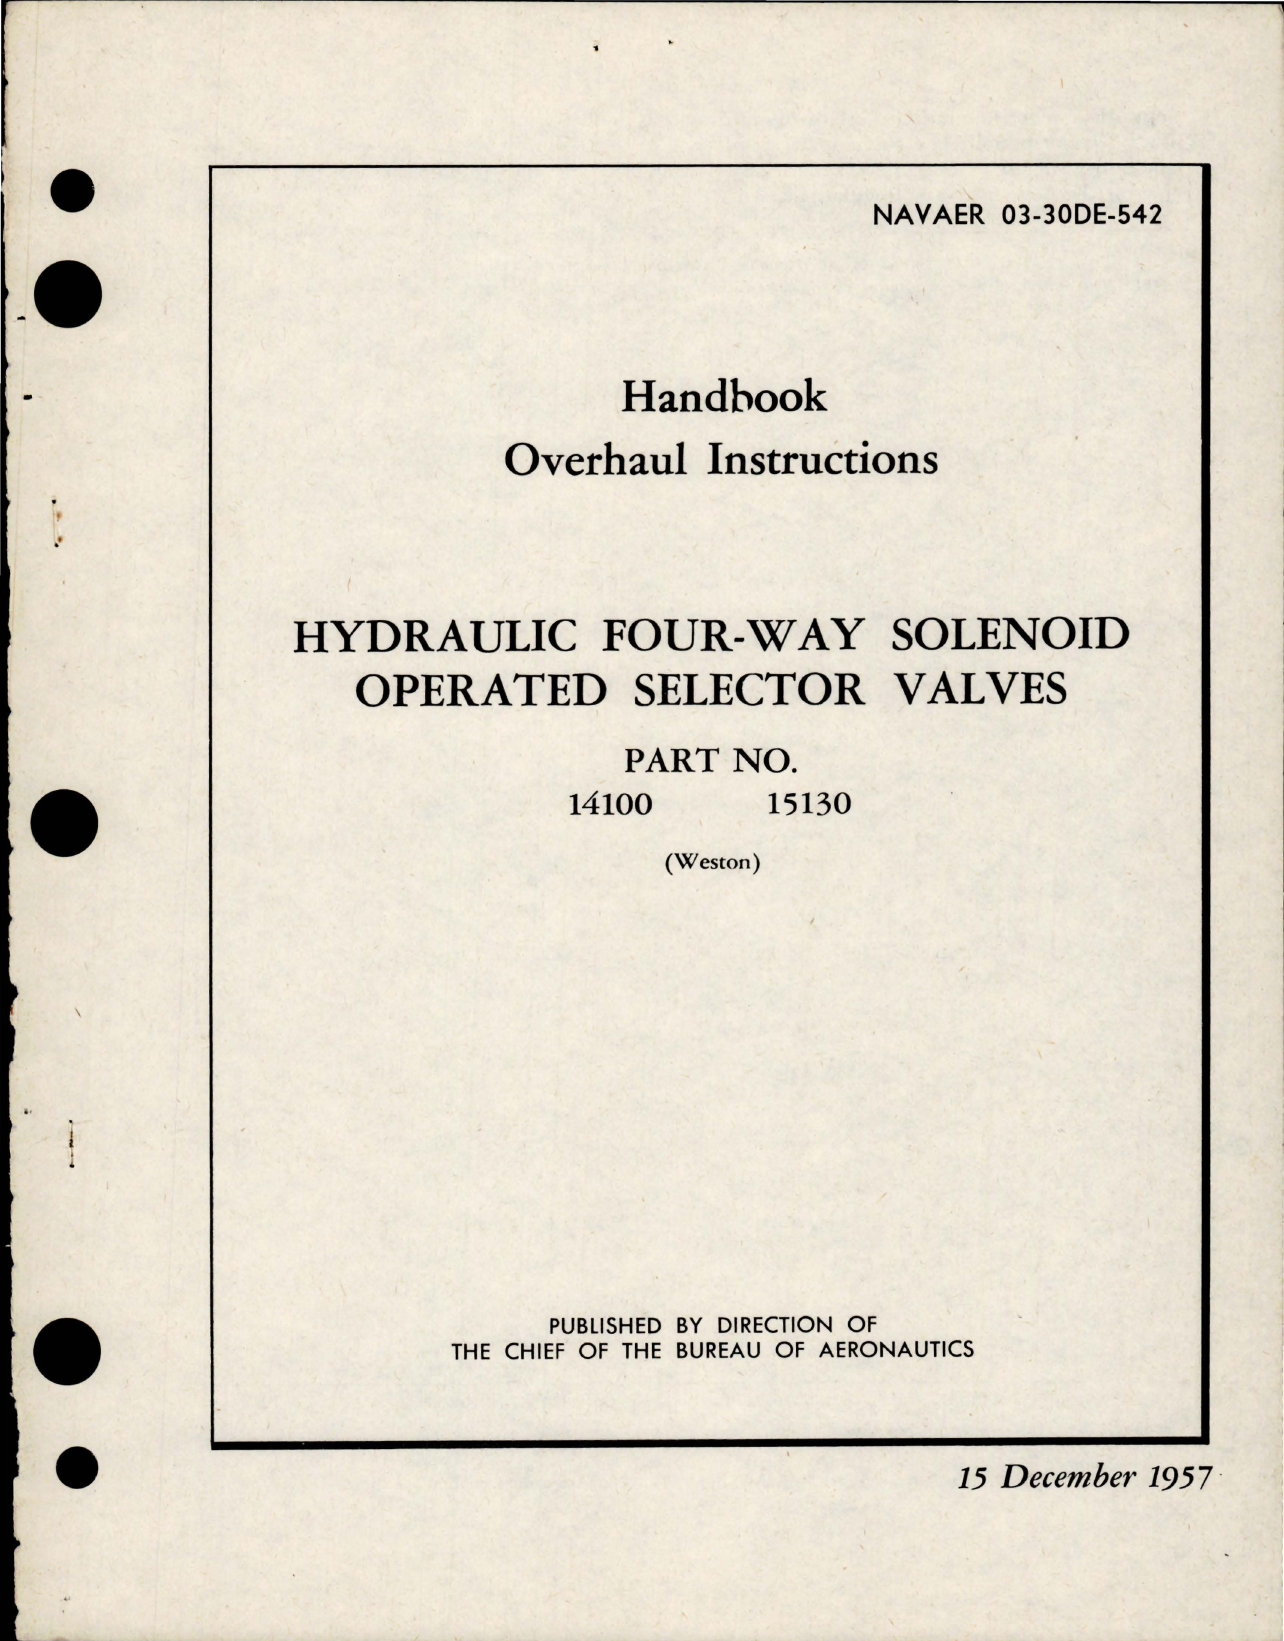 Sample page 1 from AirCorps Library document: Overhaul Instructions for Hydraulic Four-Way Solenoid Operated Selector Valves - Parts 14100 and 15130 